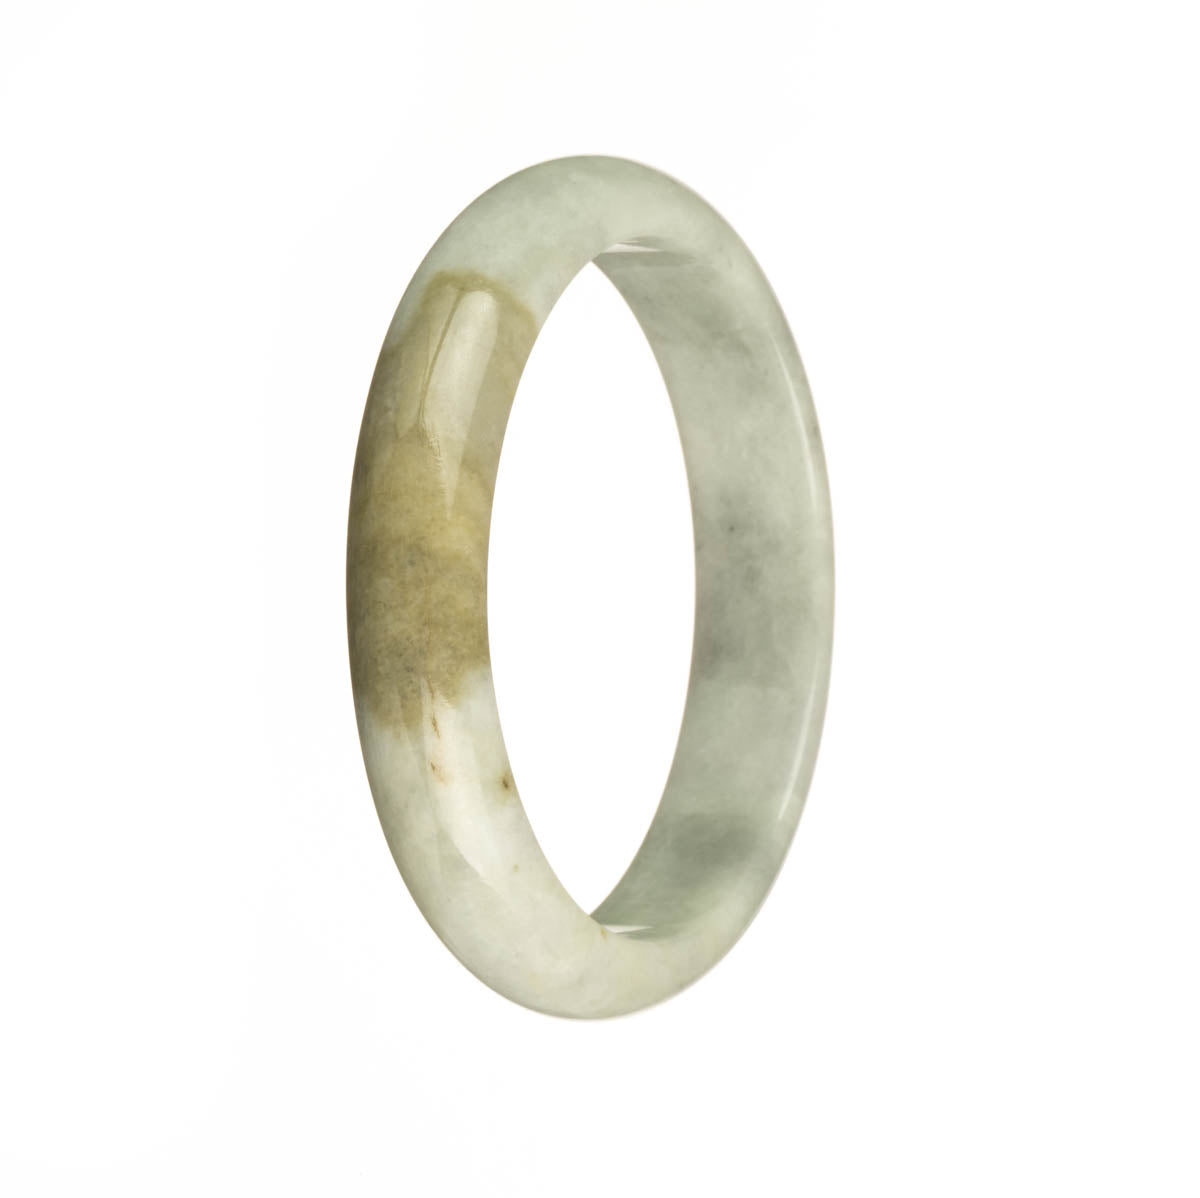 A half-moon shaped jade bracelet with a genuine Type A pale green and brown stone, featuring a unique grey pattern.